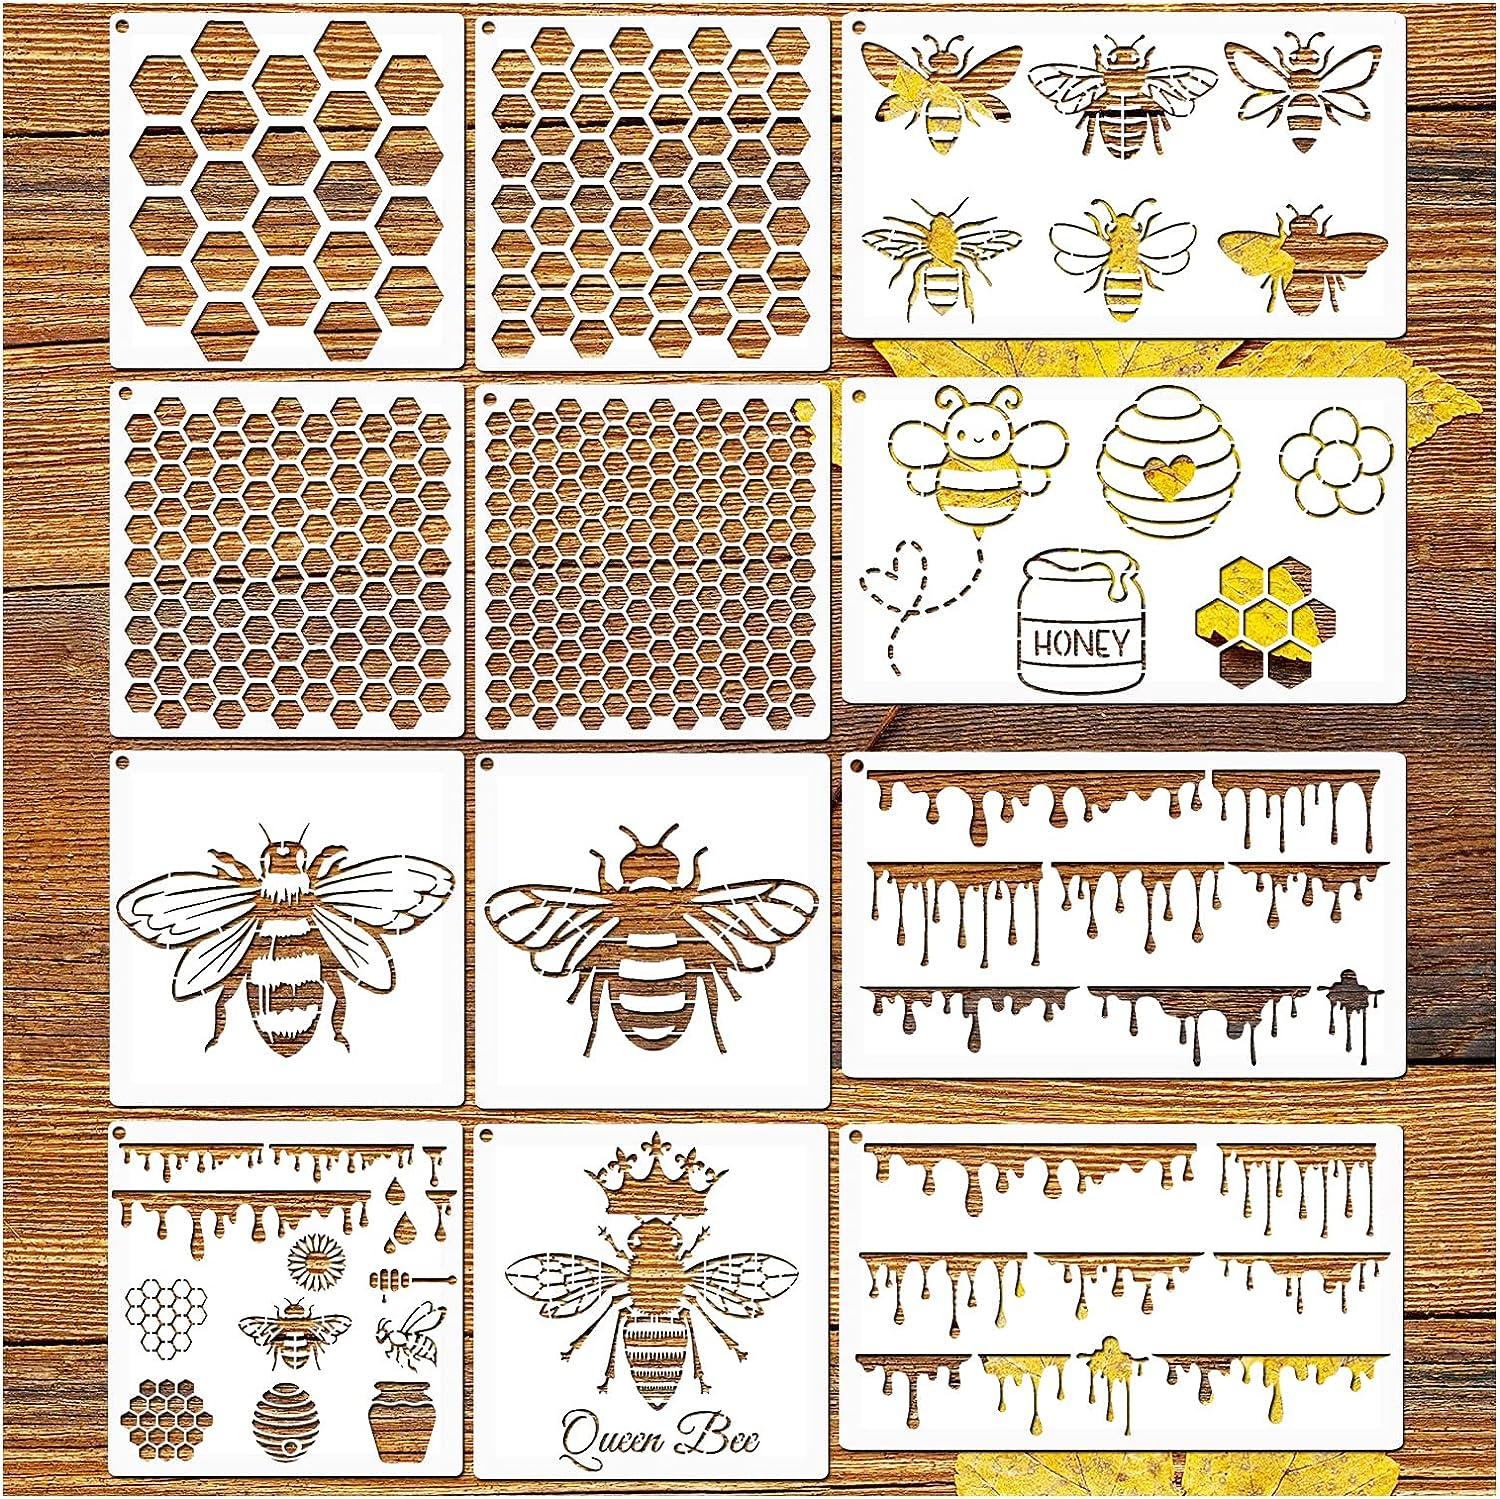 100 Pcs Stencils for Painting on Wood Reusable Stencil Crafts